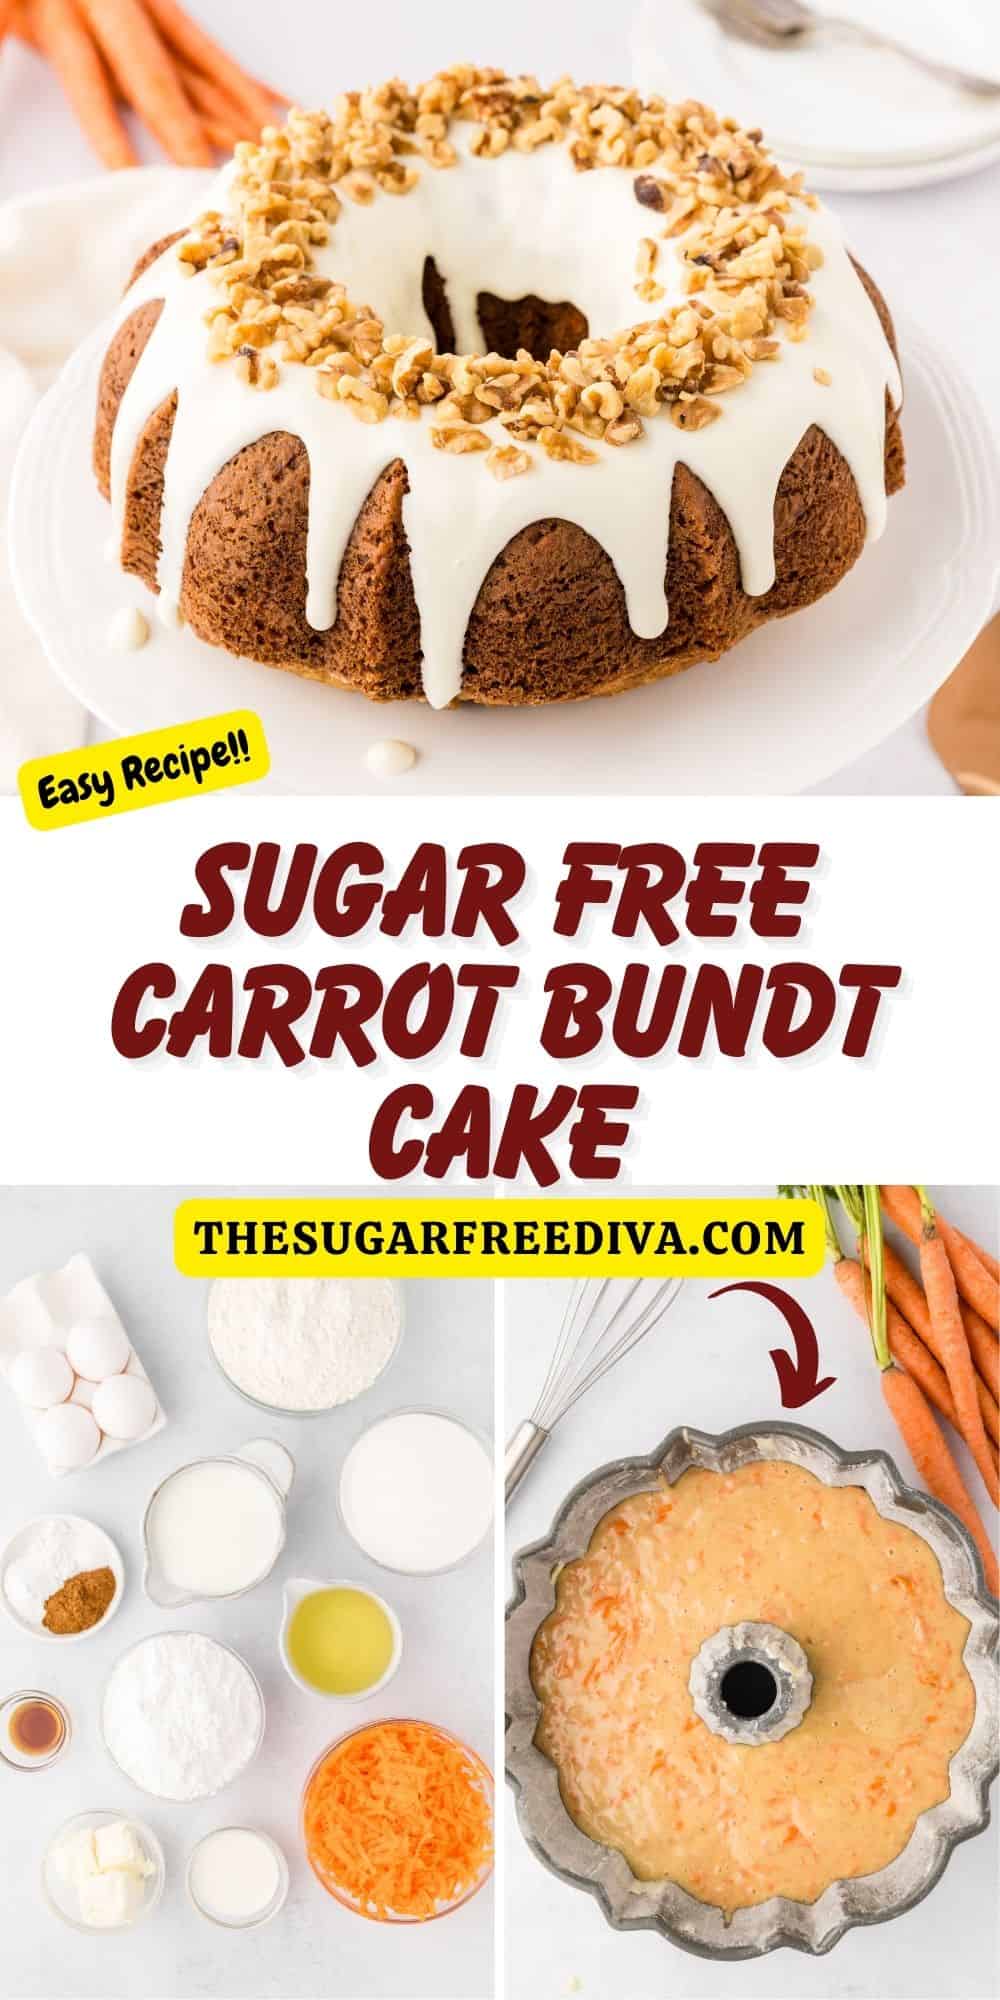 Sugar Free Carrot Bundt Cake, a flavorful and delicious dessert recipe made with fresh carrots, a cream cheese icing, and no added sugar.